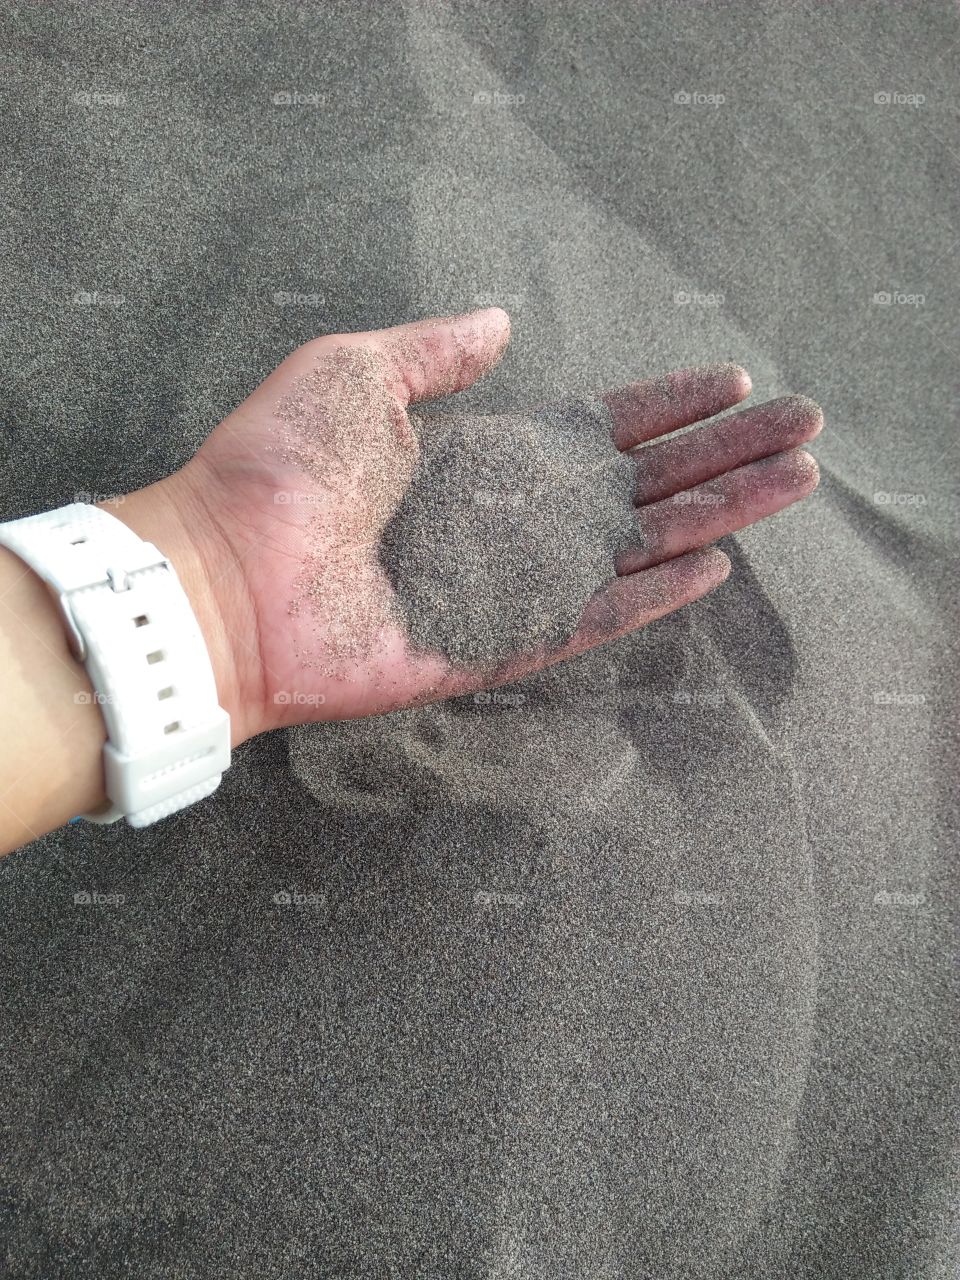 the sand in my grasp